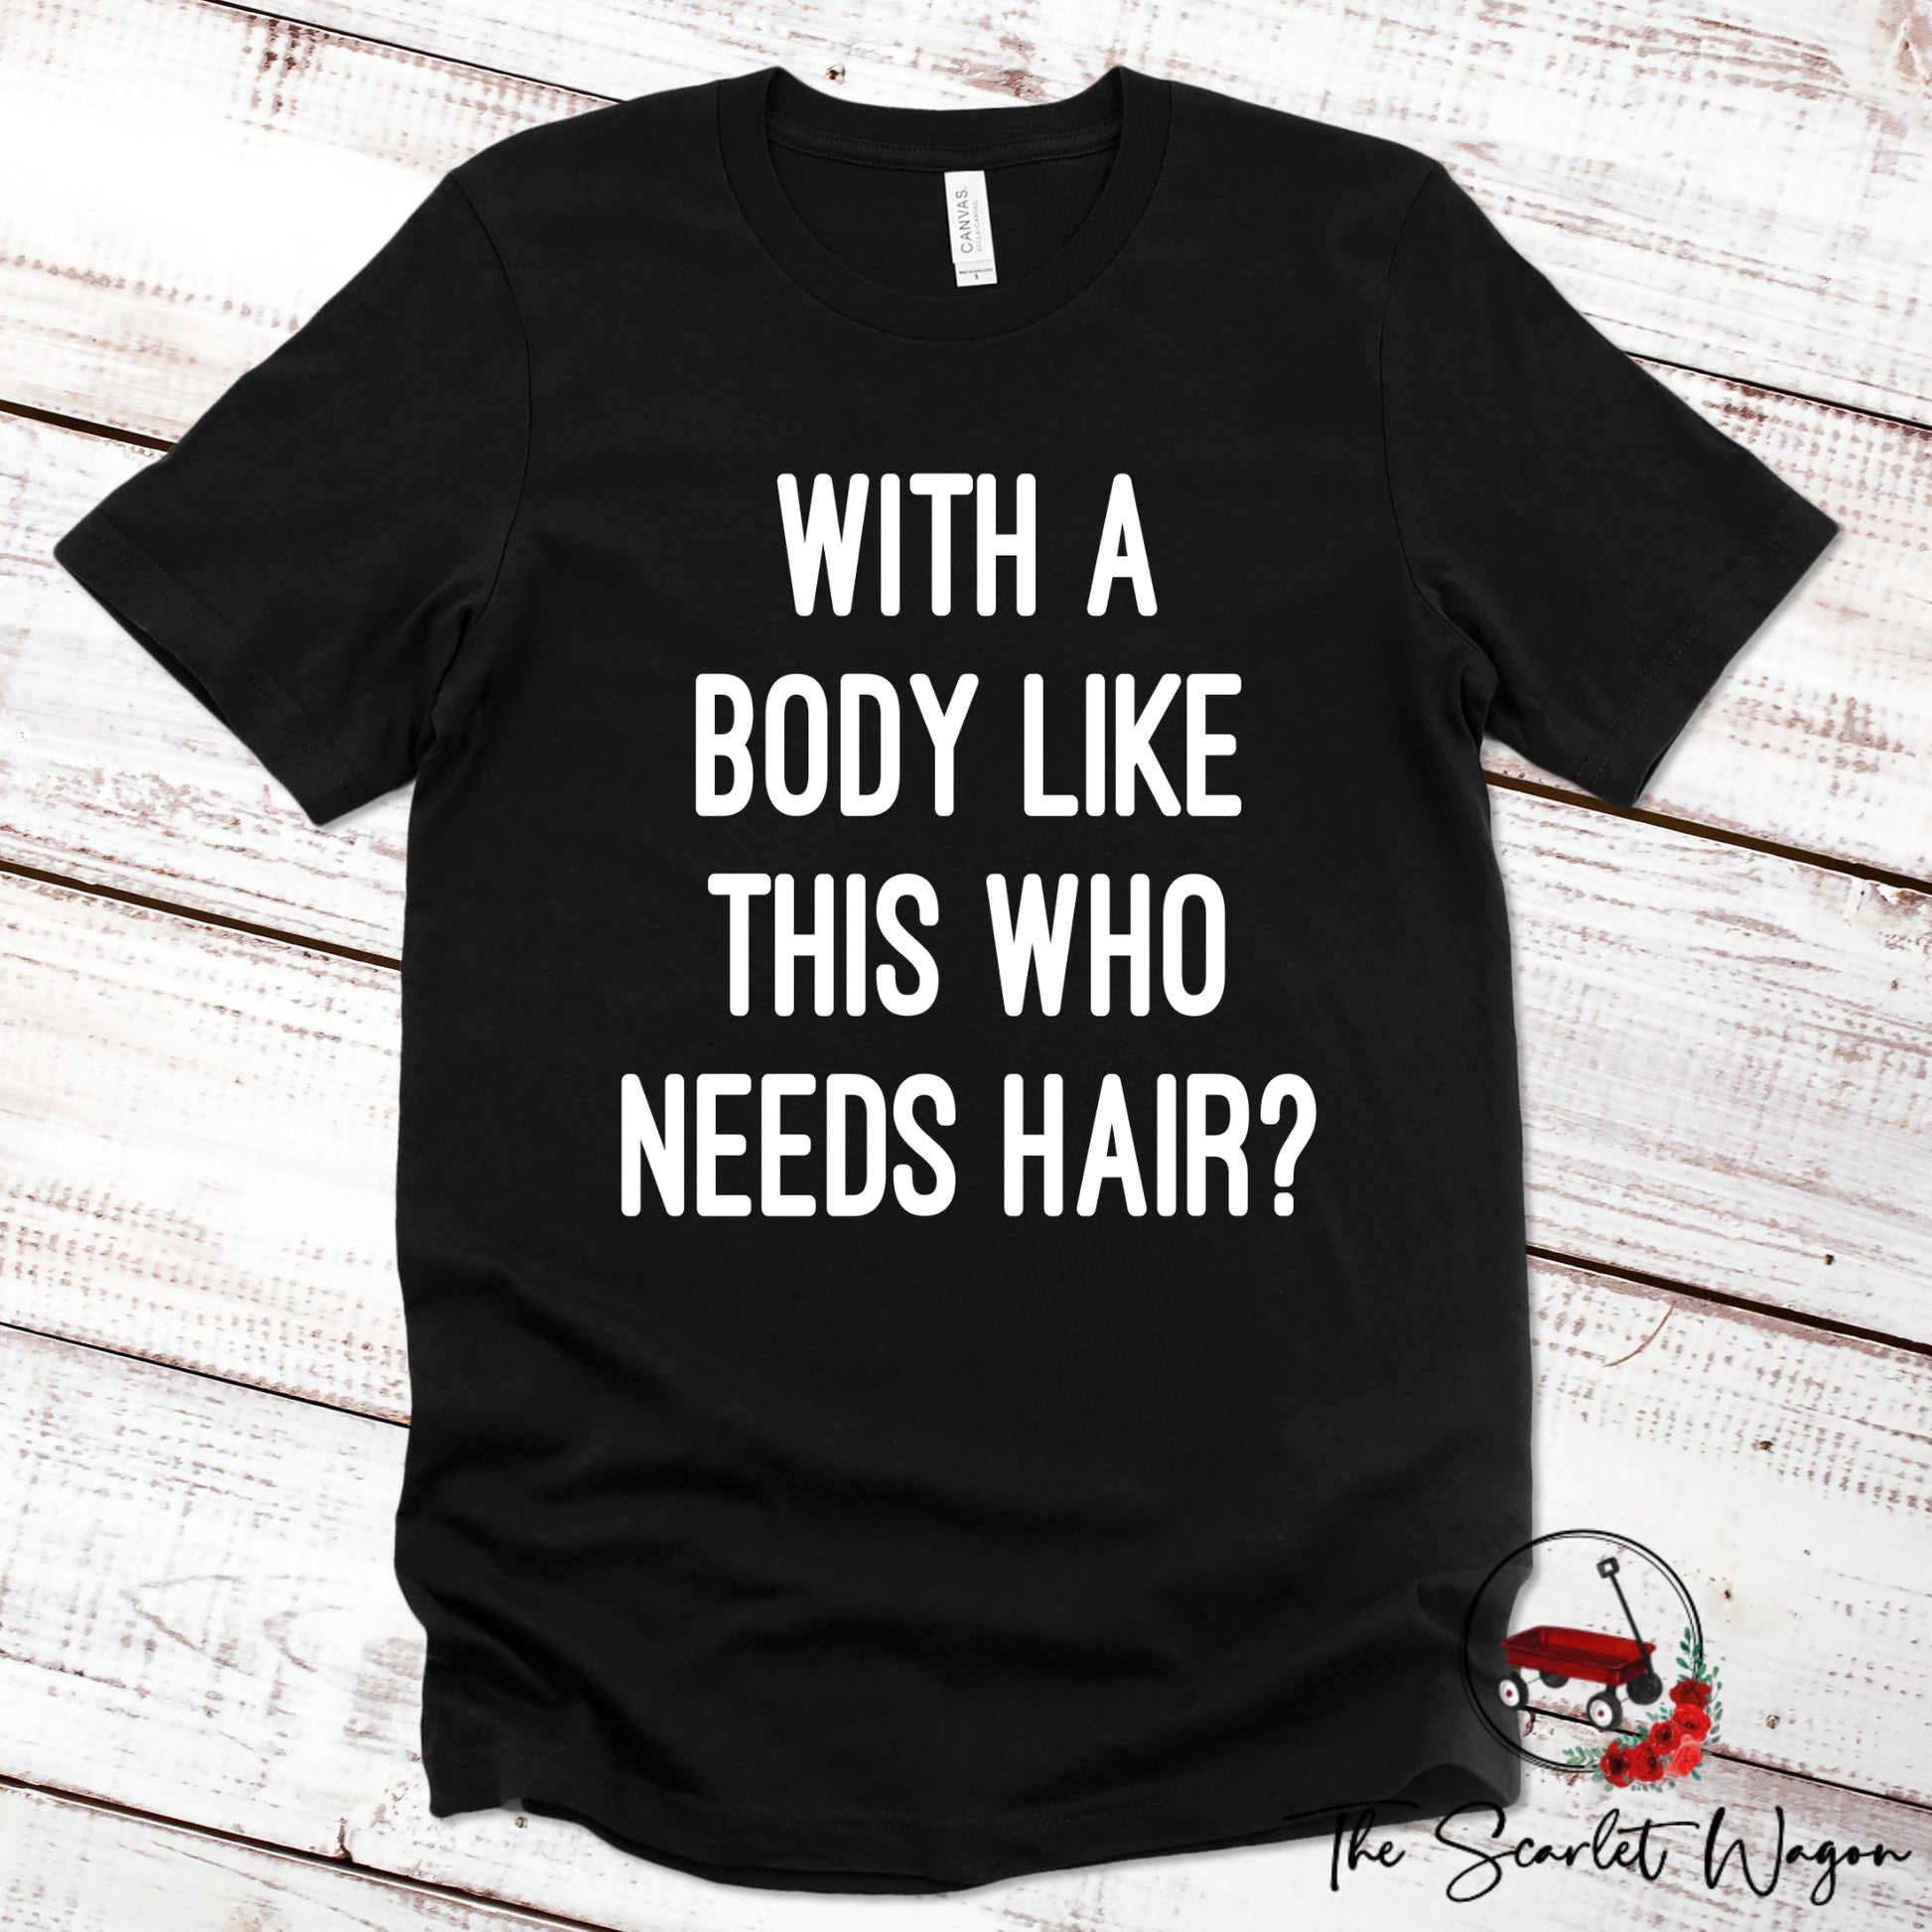 With a Body Like This Who Needs Hair Premium Tee Scarlet Wagon Black XS 